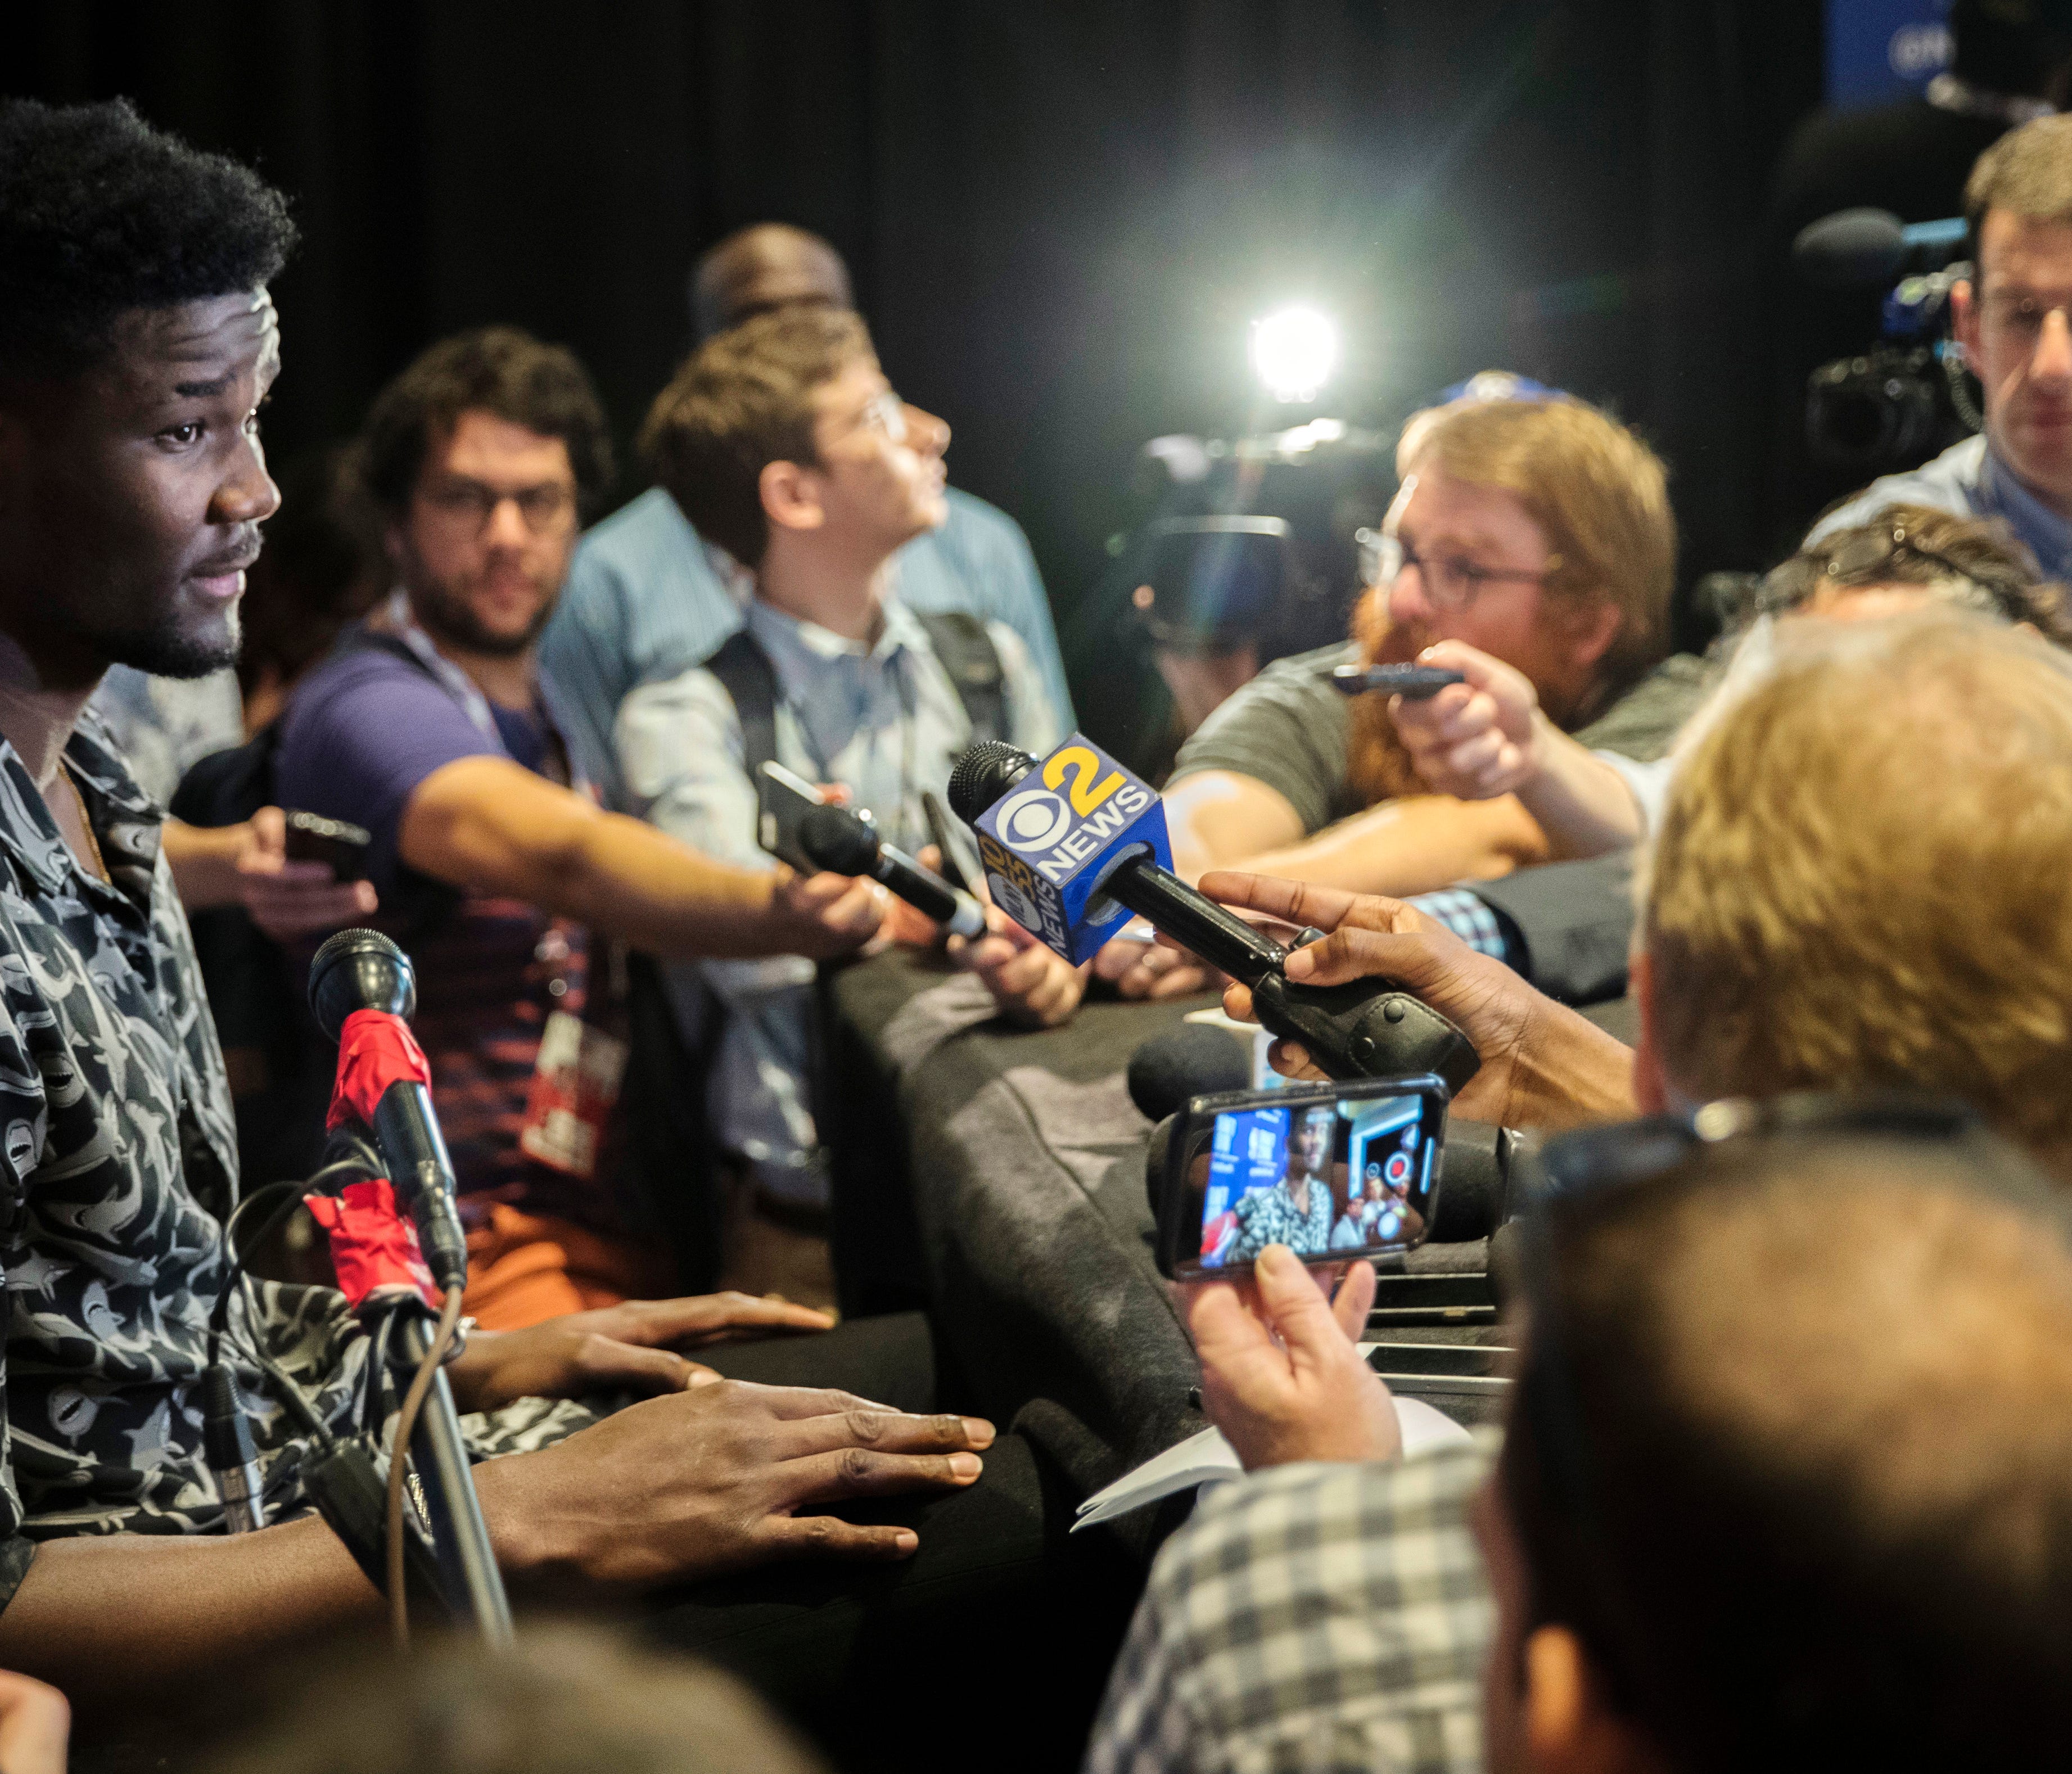 Arizona's DeAndre Ayton, left, speaks to reporters during a media availability with the top basketball prospects in the NBA Draft, Wednesday, June 20, 2018, in New York. (AP Photo/Mary Altaffer)